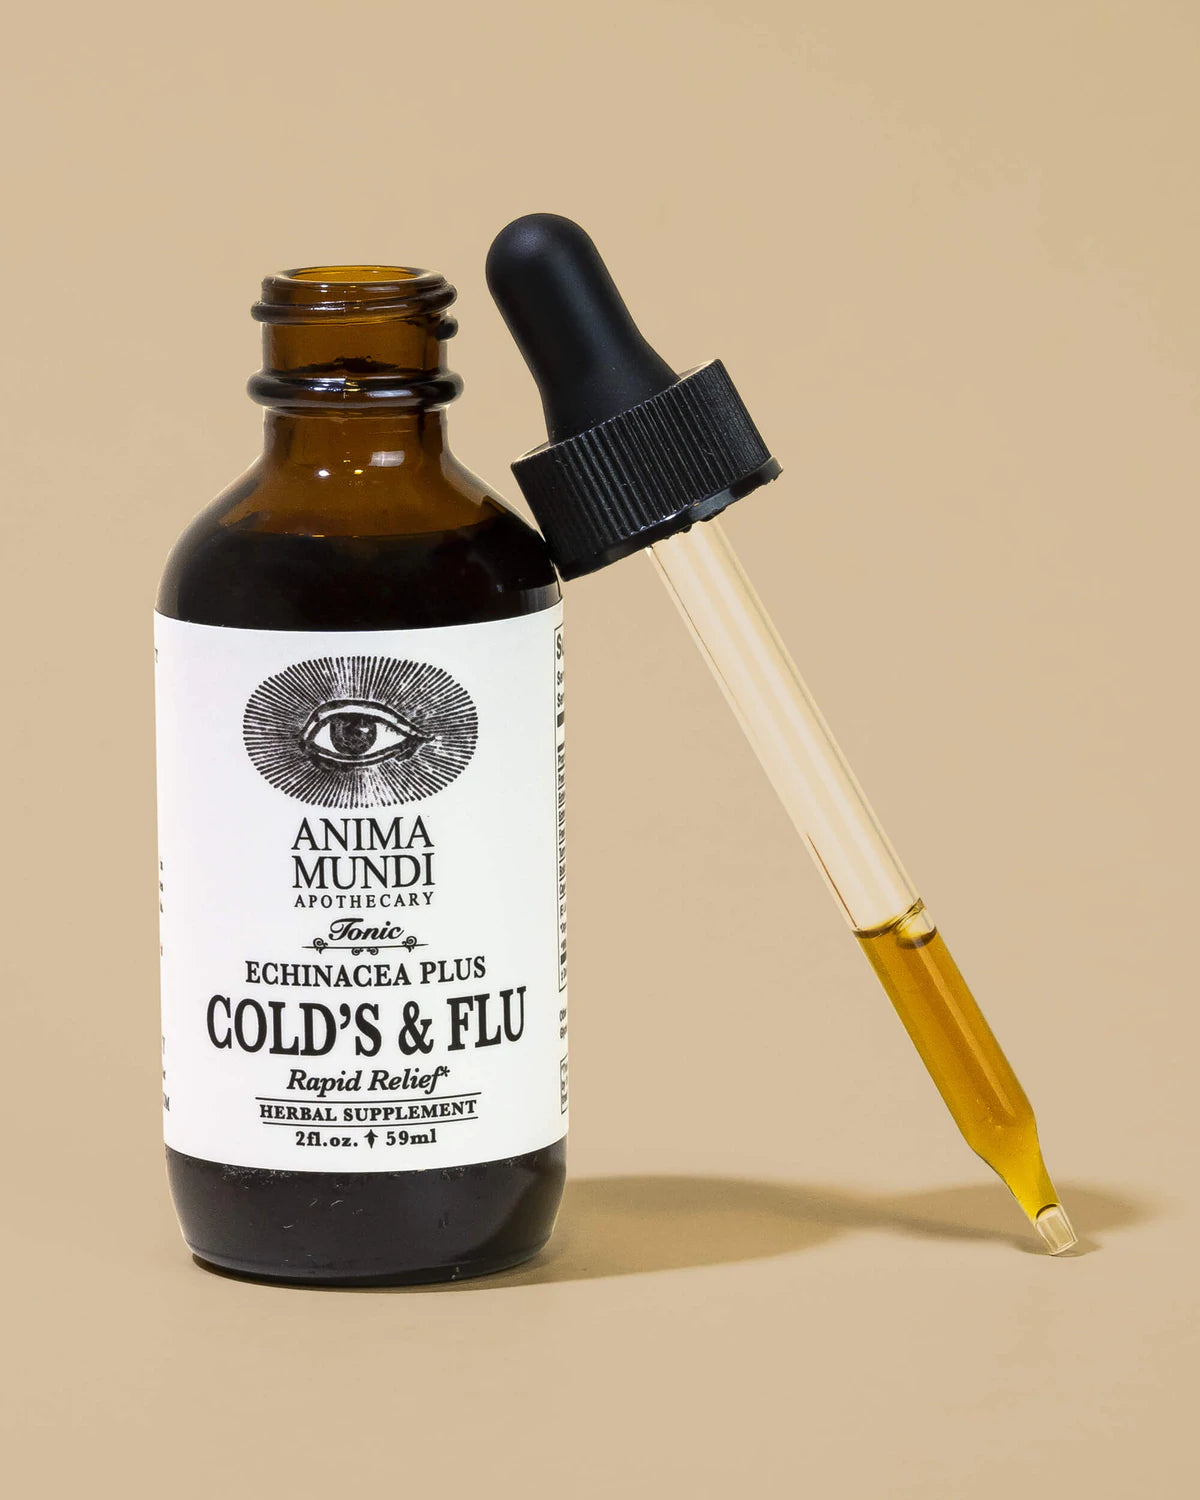 COLD'S COCKTAIL : High Potency Colds & Flu Tonic